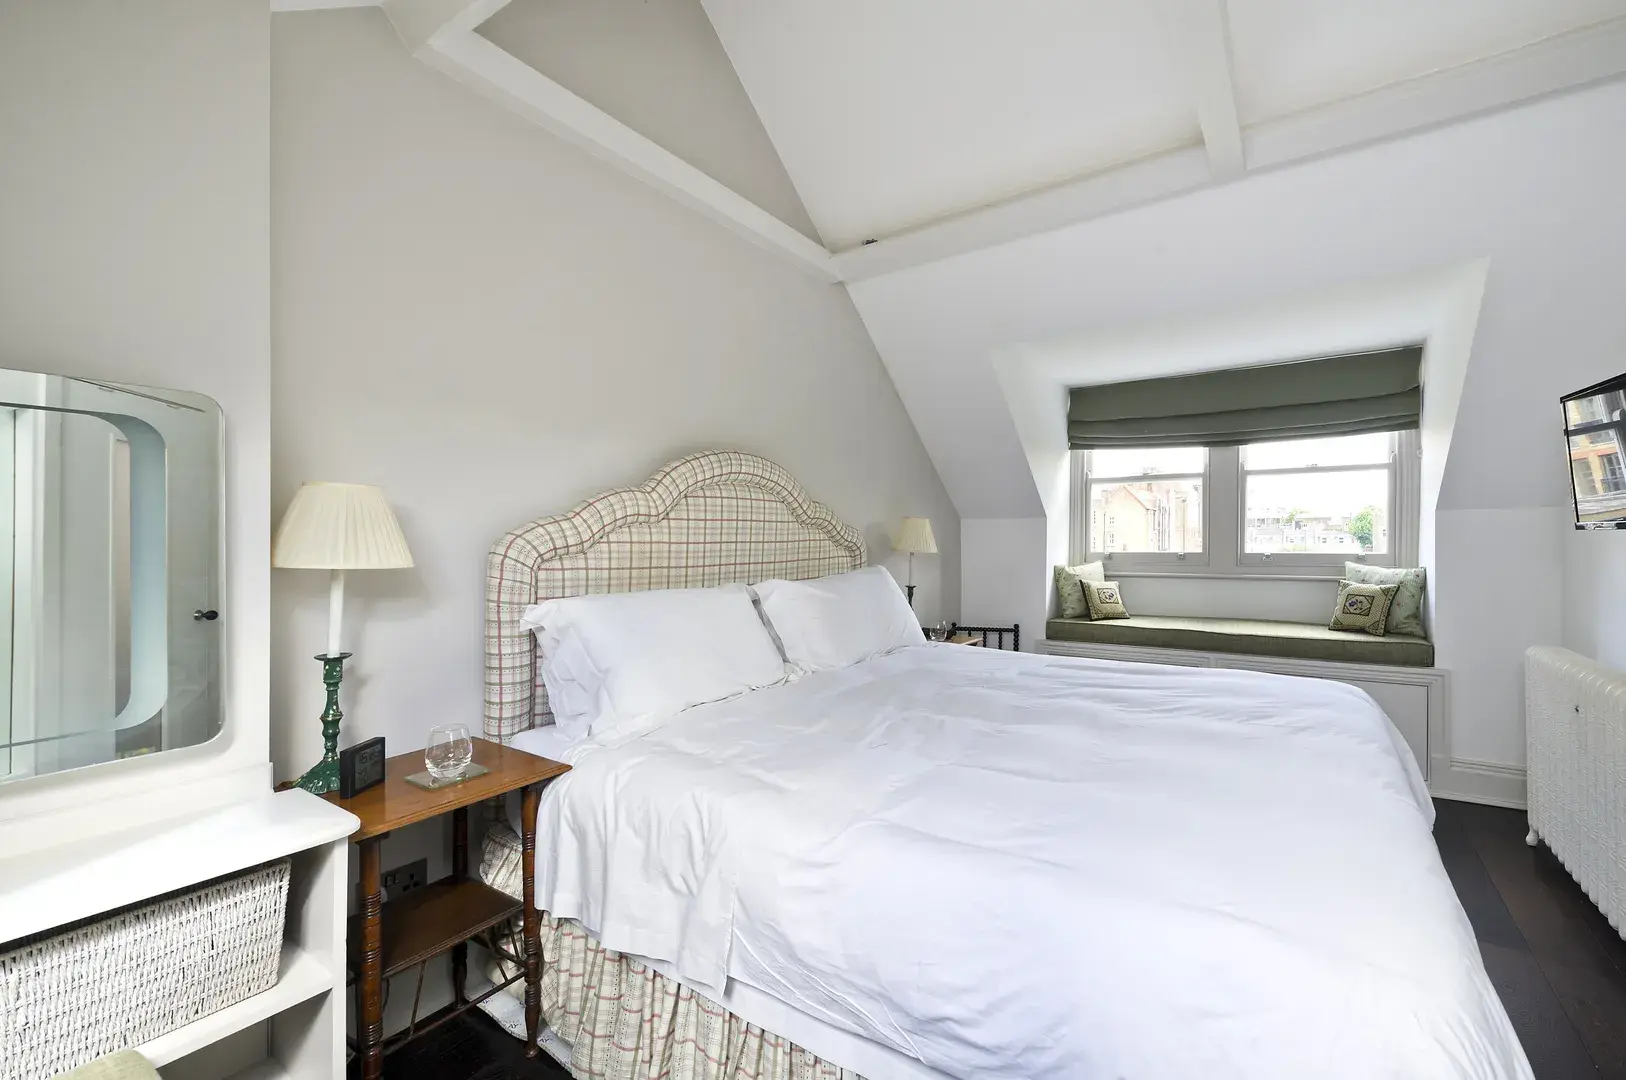 Camera Place, holiday home in Chelsea, London